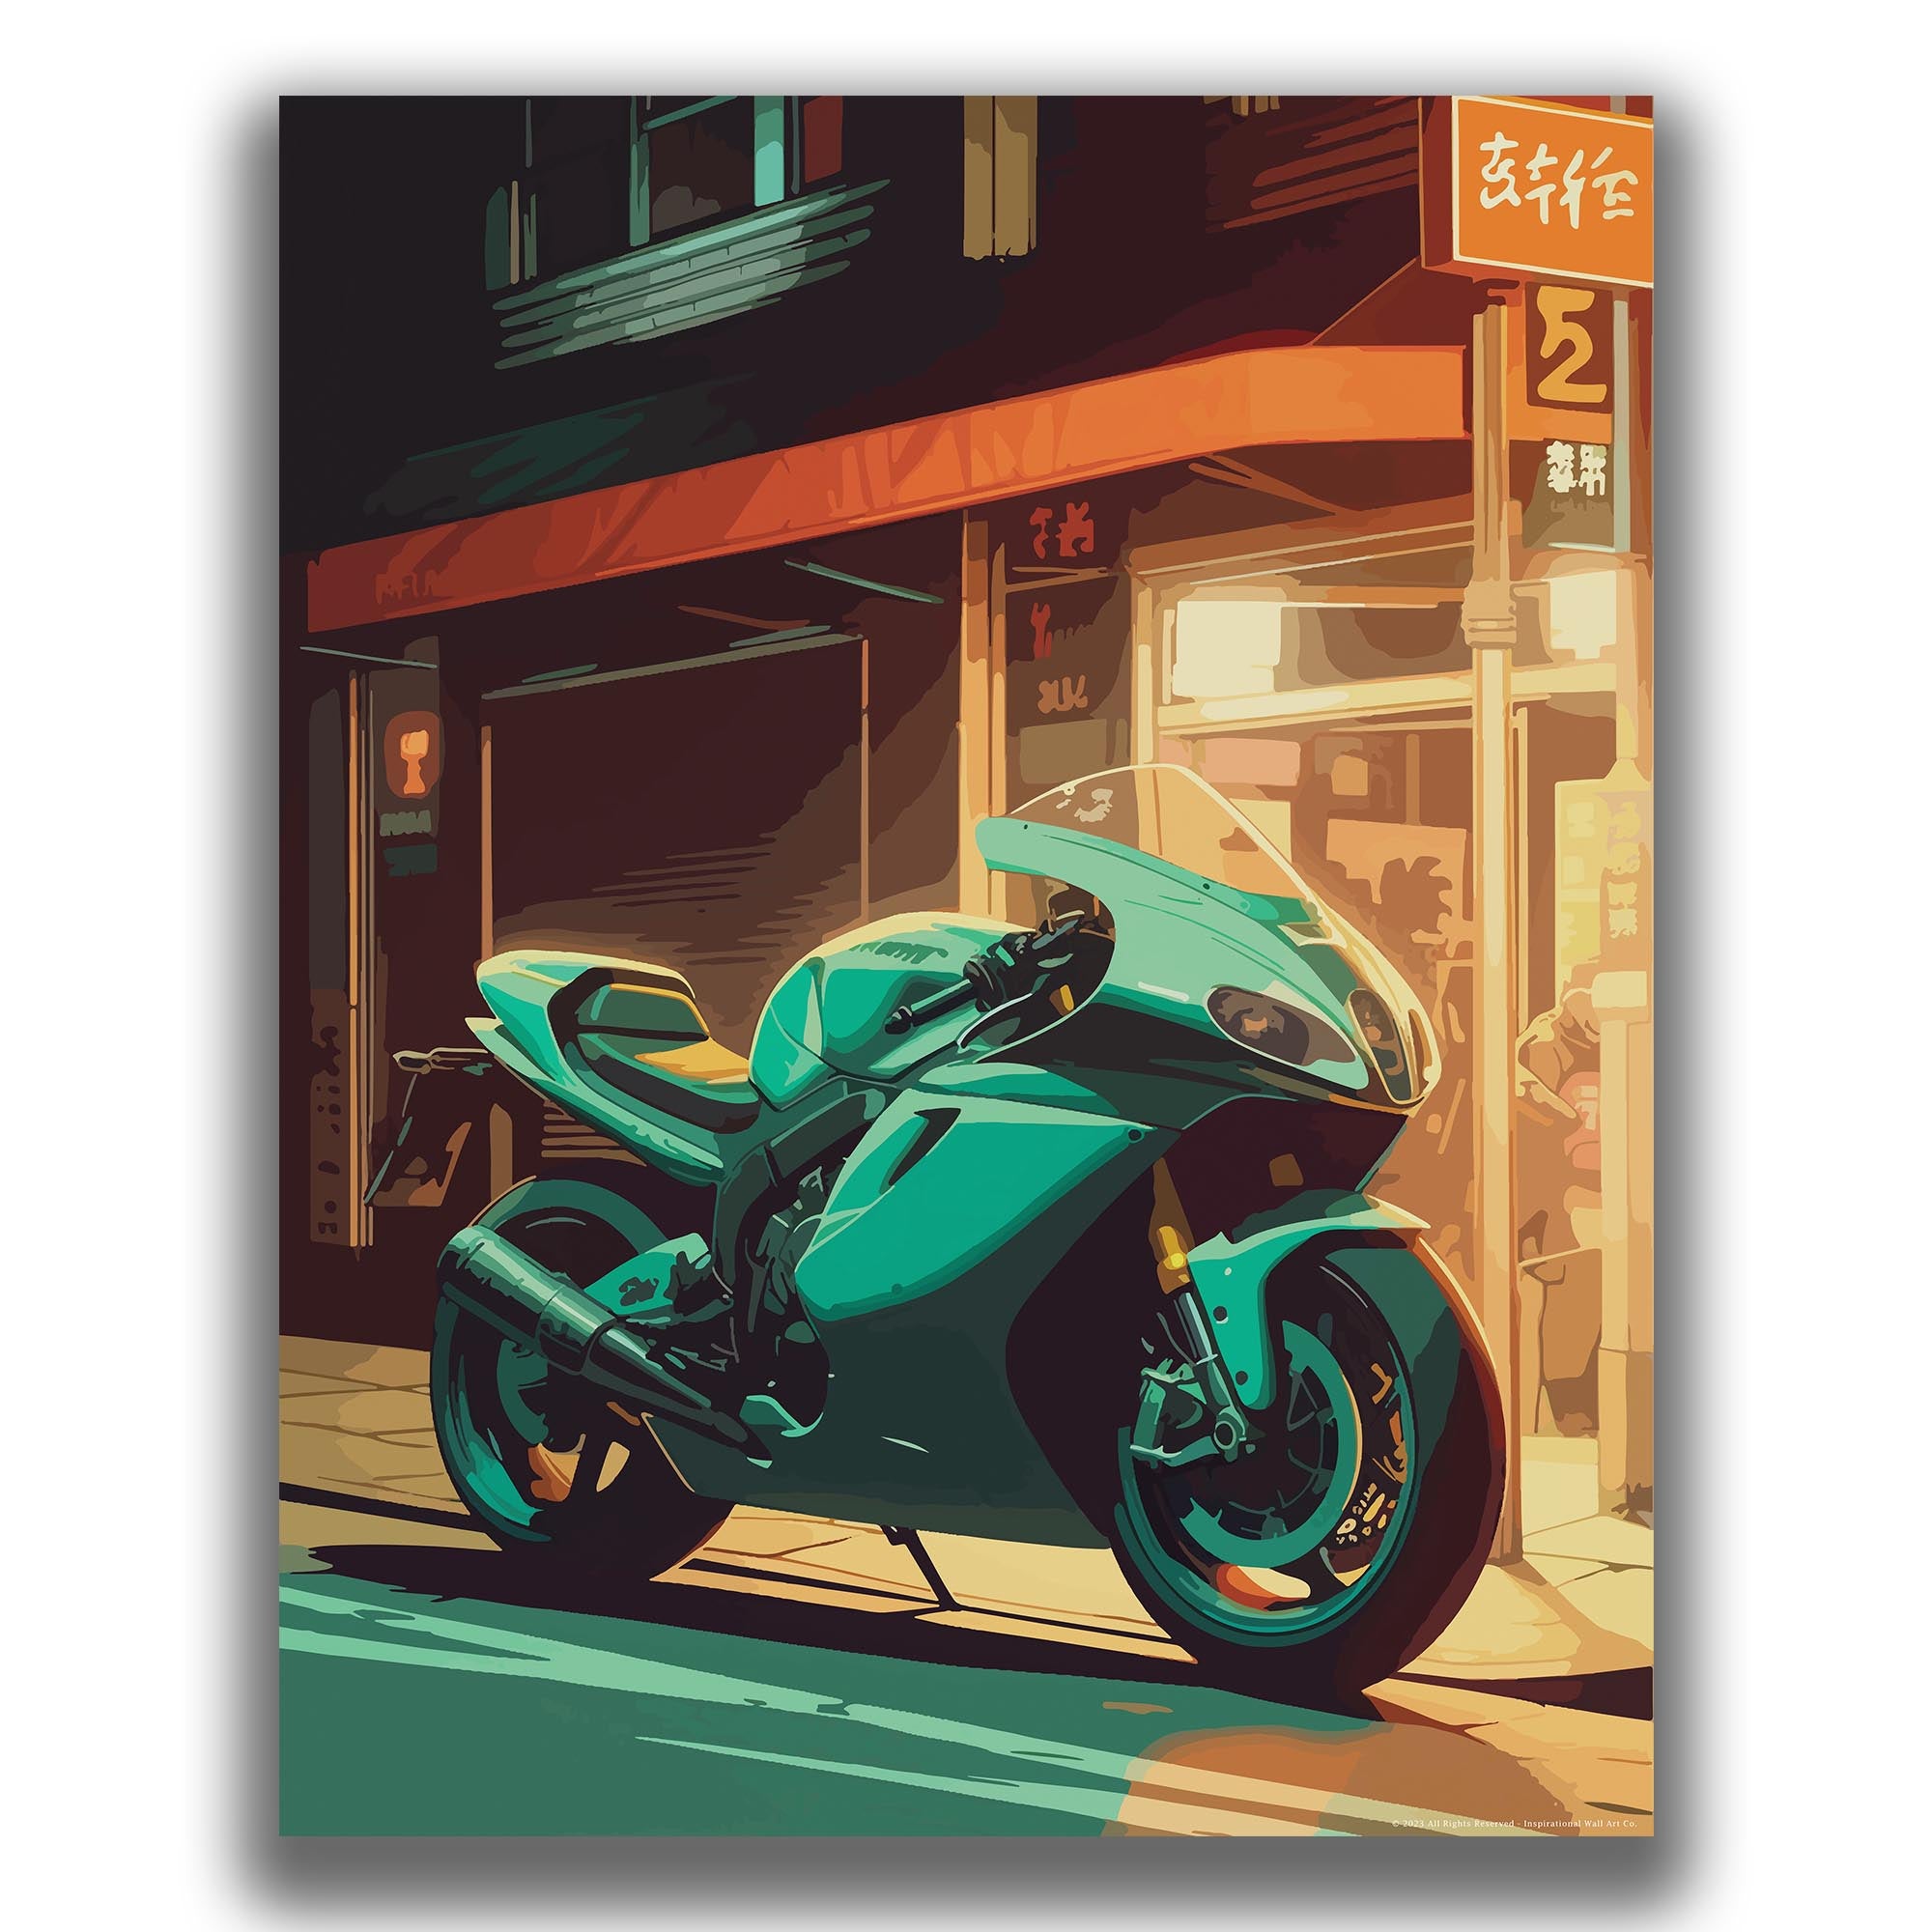 Riding Legends - Motorcycle Poster